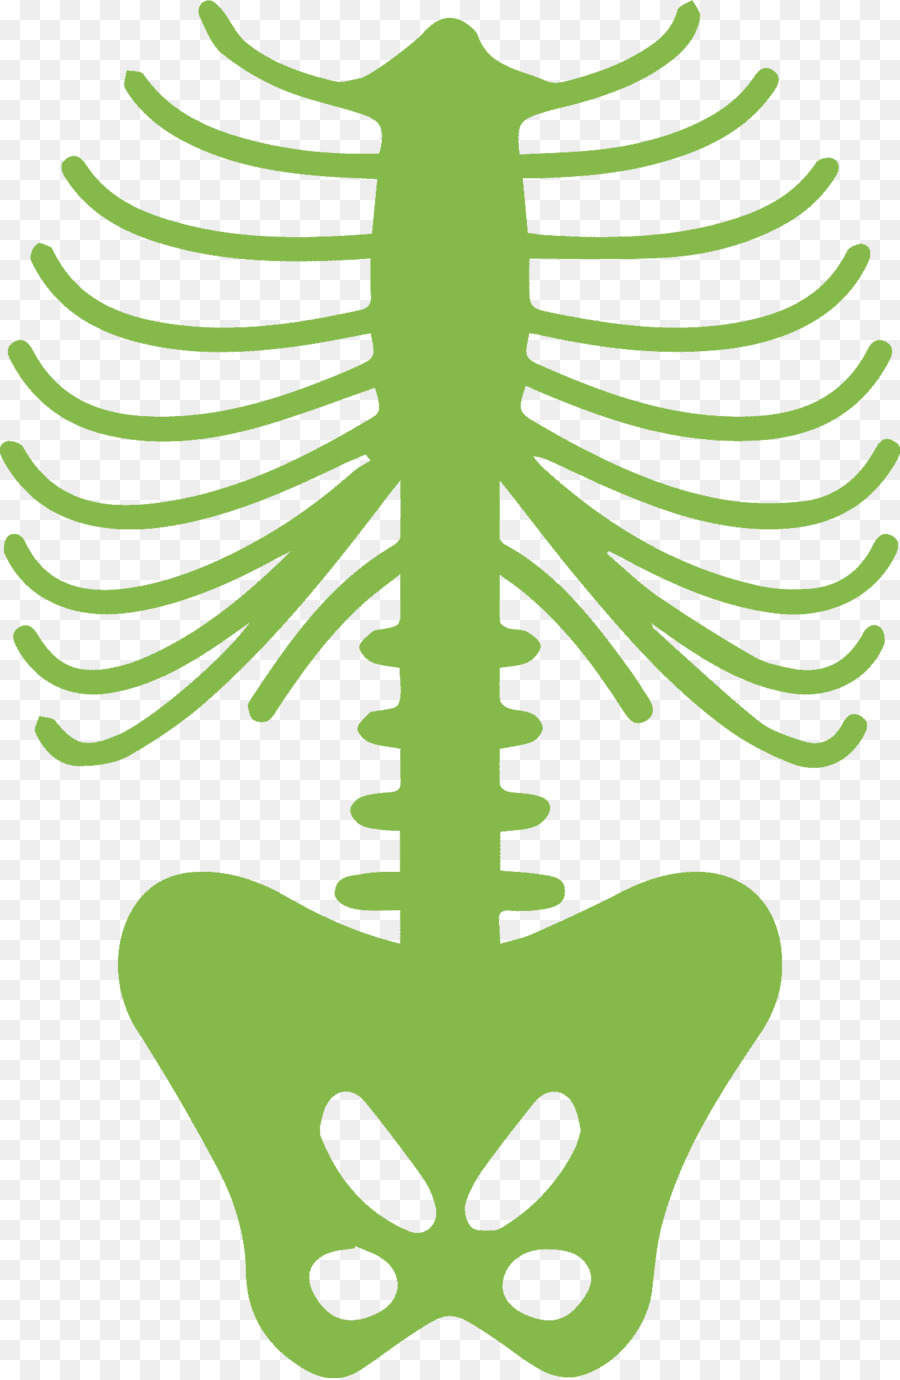 Rib cage Human body Human skeleton - others png download - 1358*2080 - Free Transparent Rib Cage png Download.